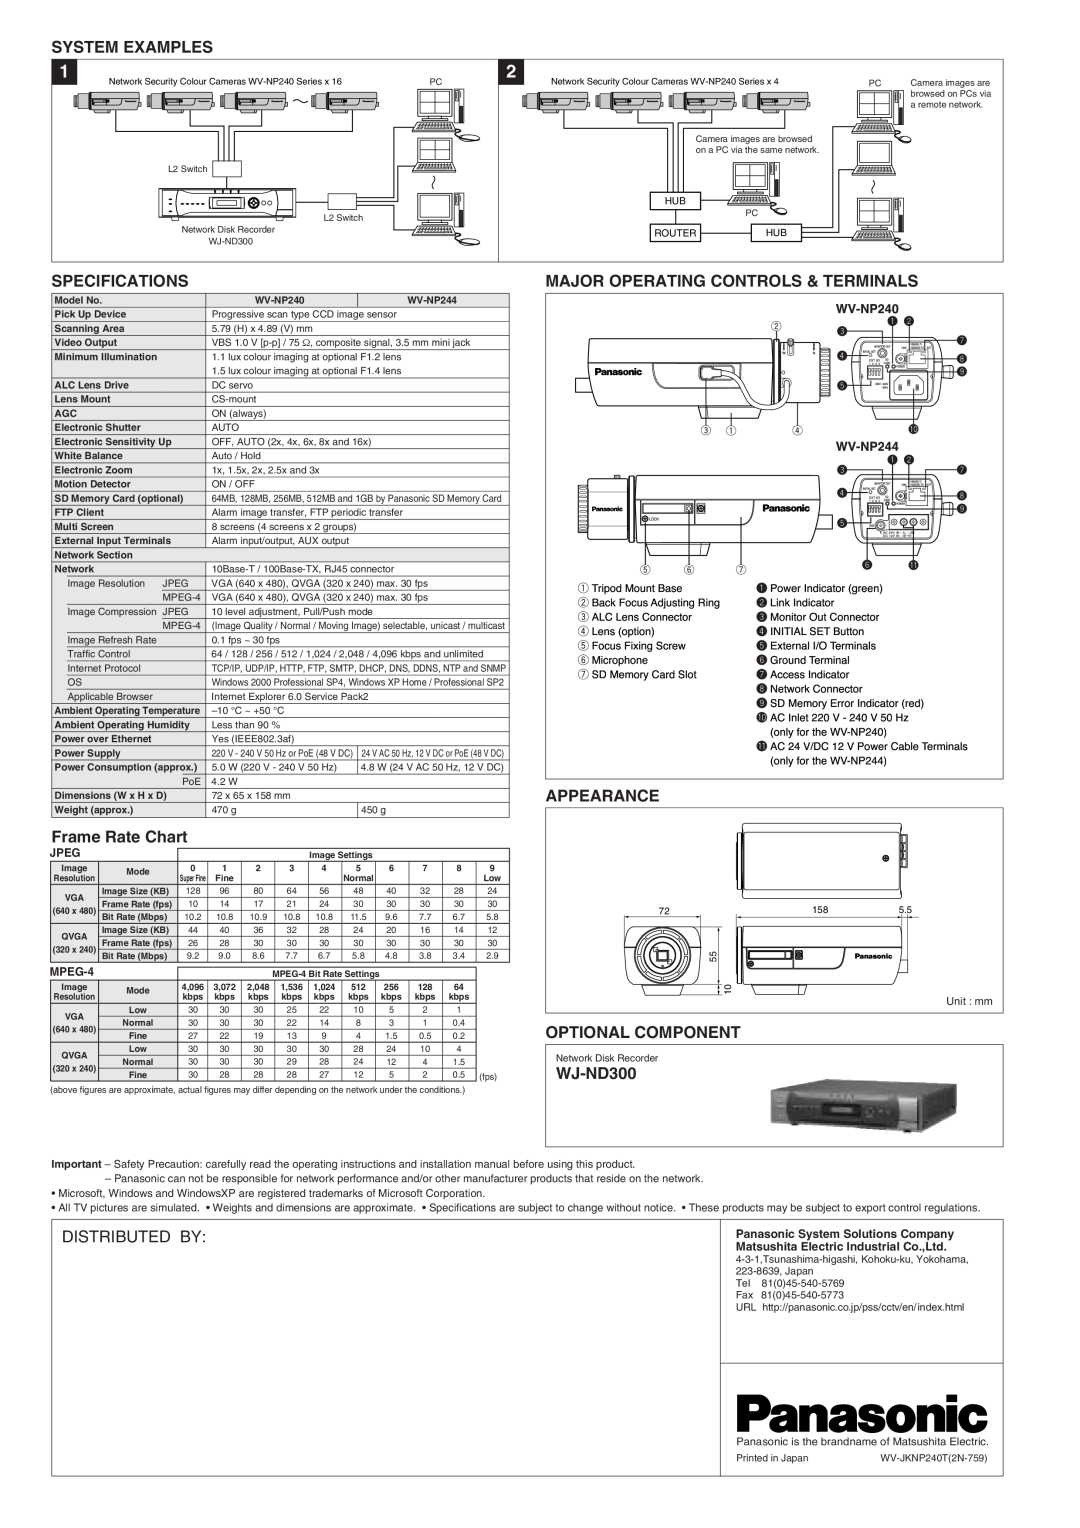 Panasonic WV-NP240 #%##, 1+2+,%3, System Examples, Specifications, Major Operating Controls & Terminals, Appearance, Jpeg 